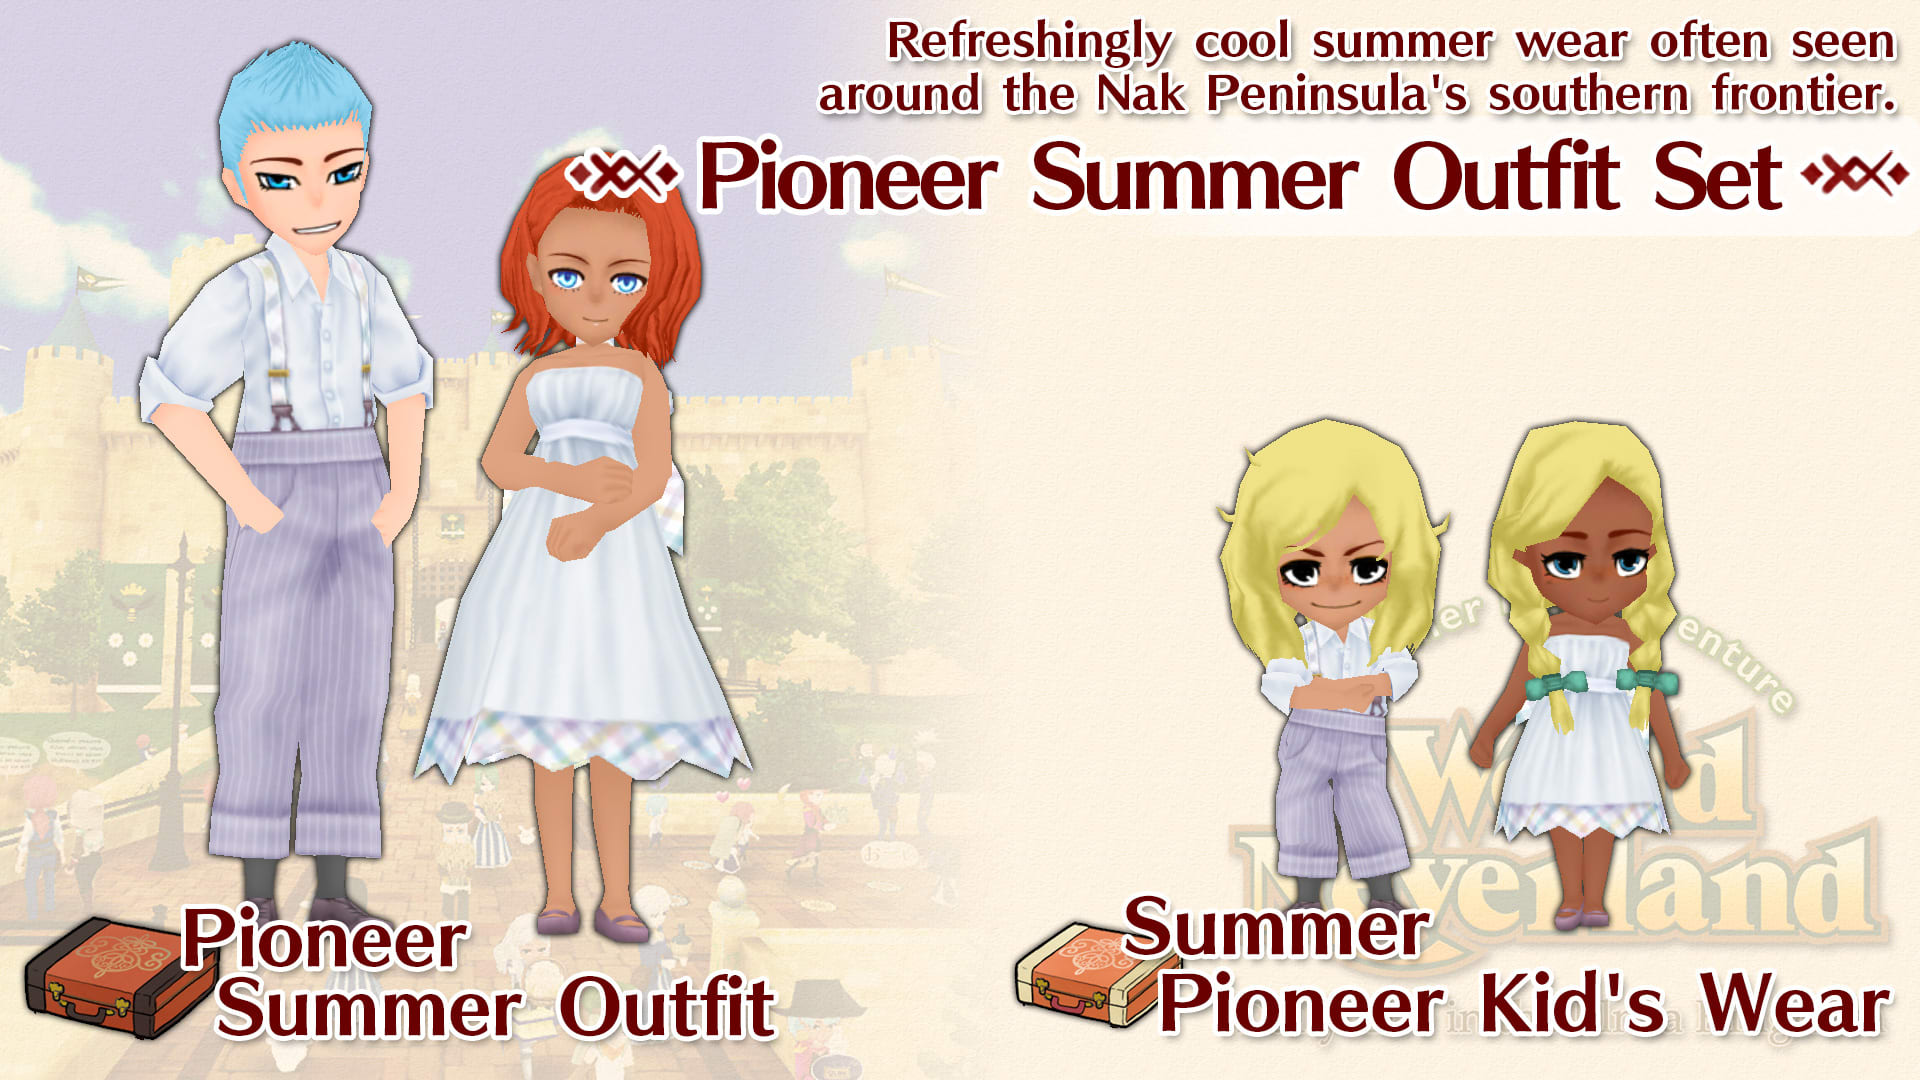 Pioneer Summer Outfit Set